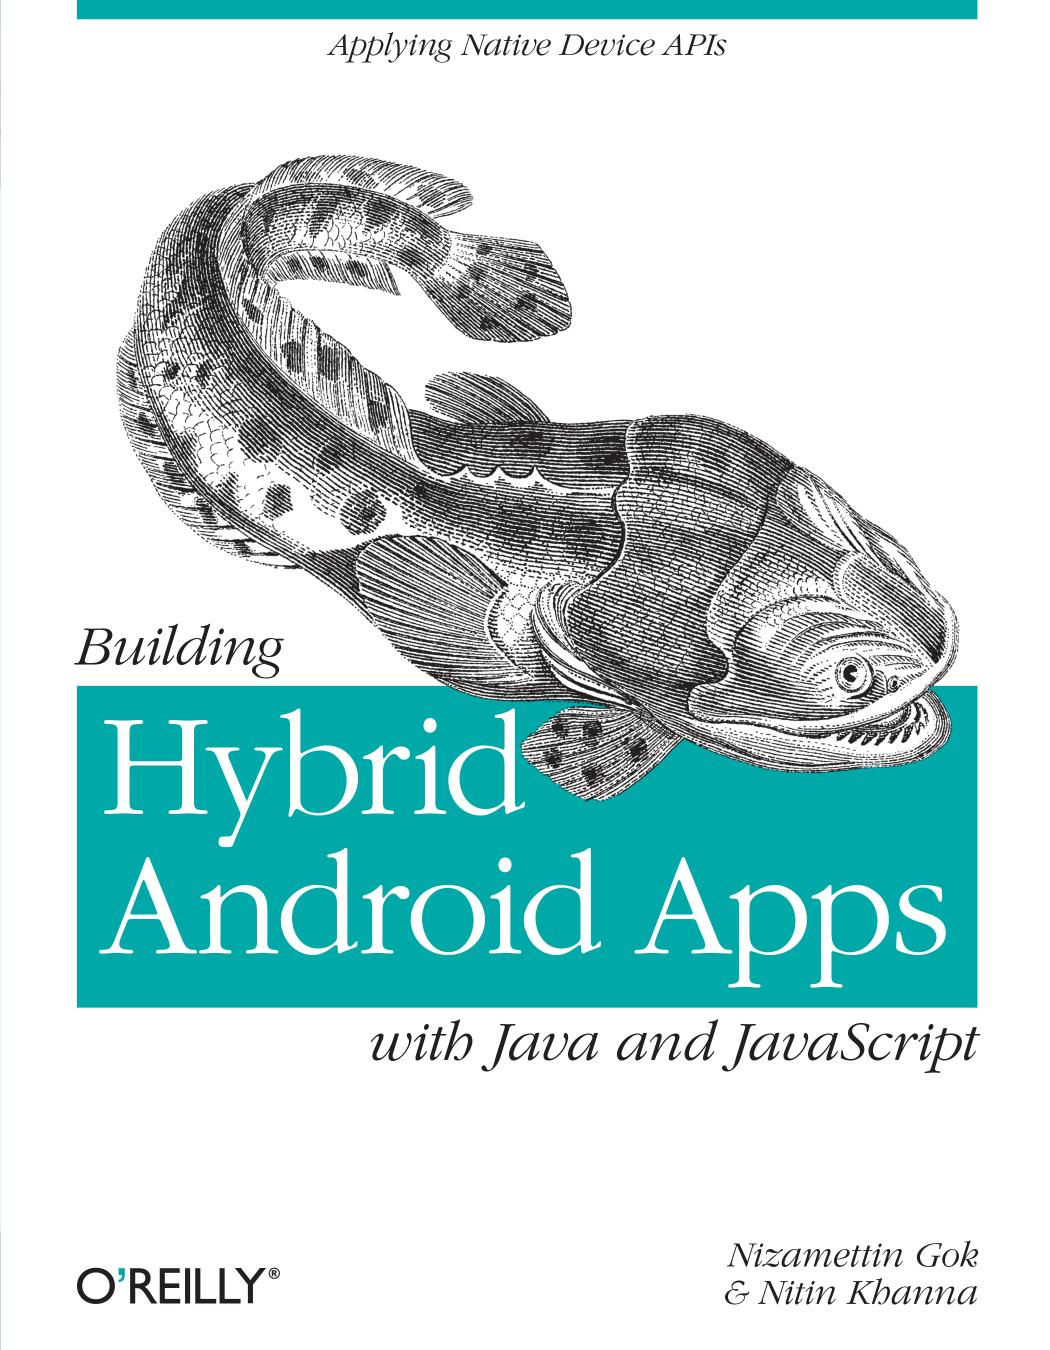 Building Hybrid Android Apps With Java and JavaScript